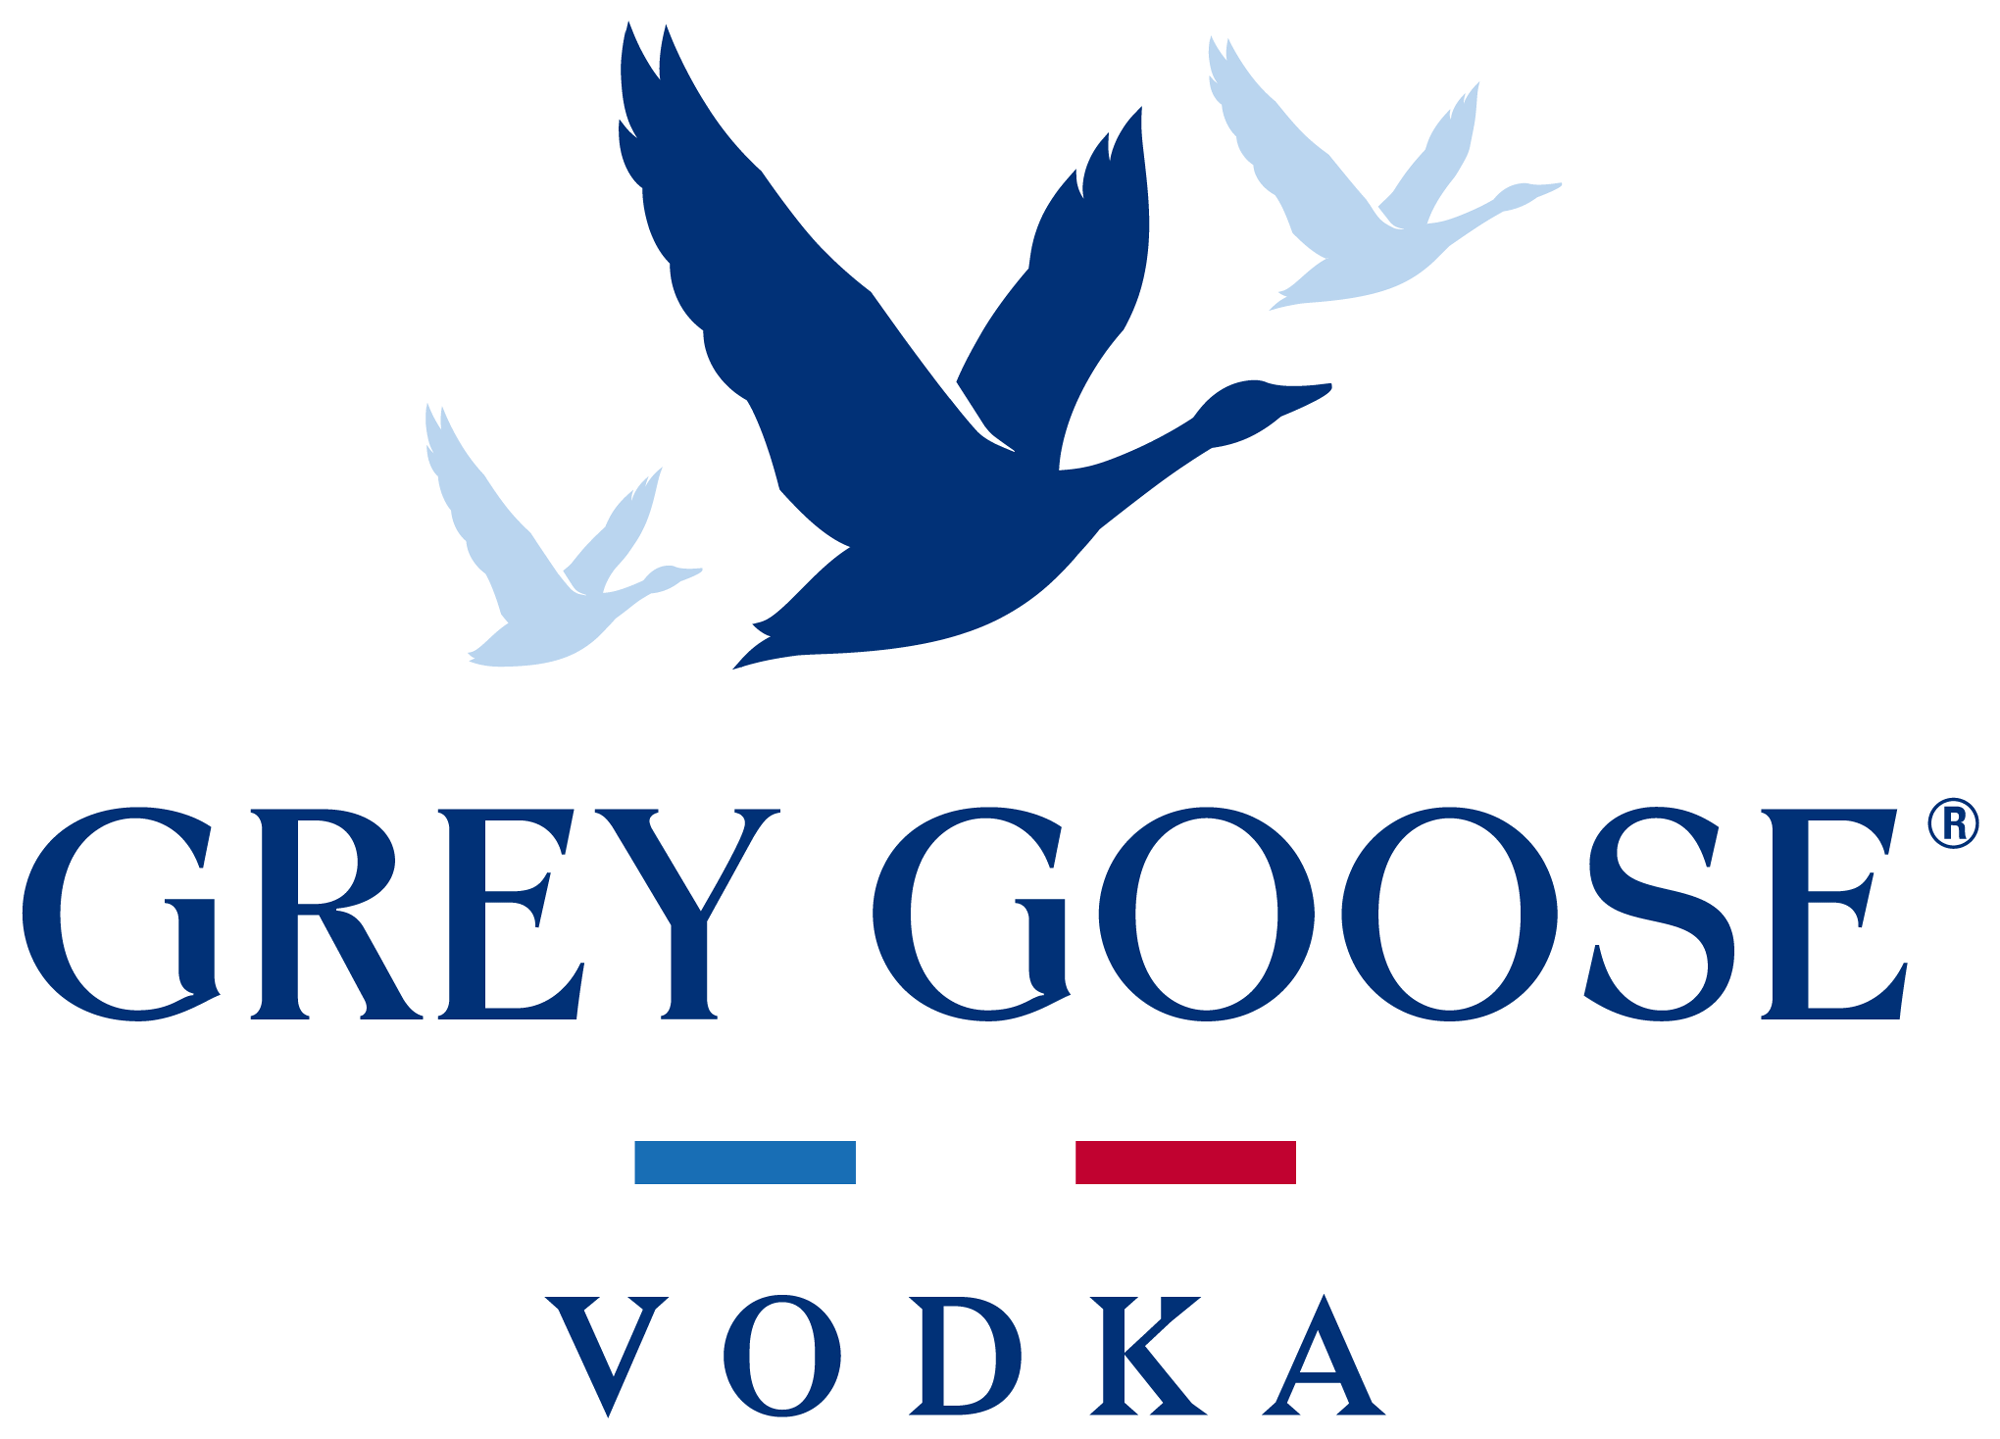 New Logo, Identity, and Packaging for Grey Goose by Ragged Edge